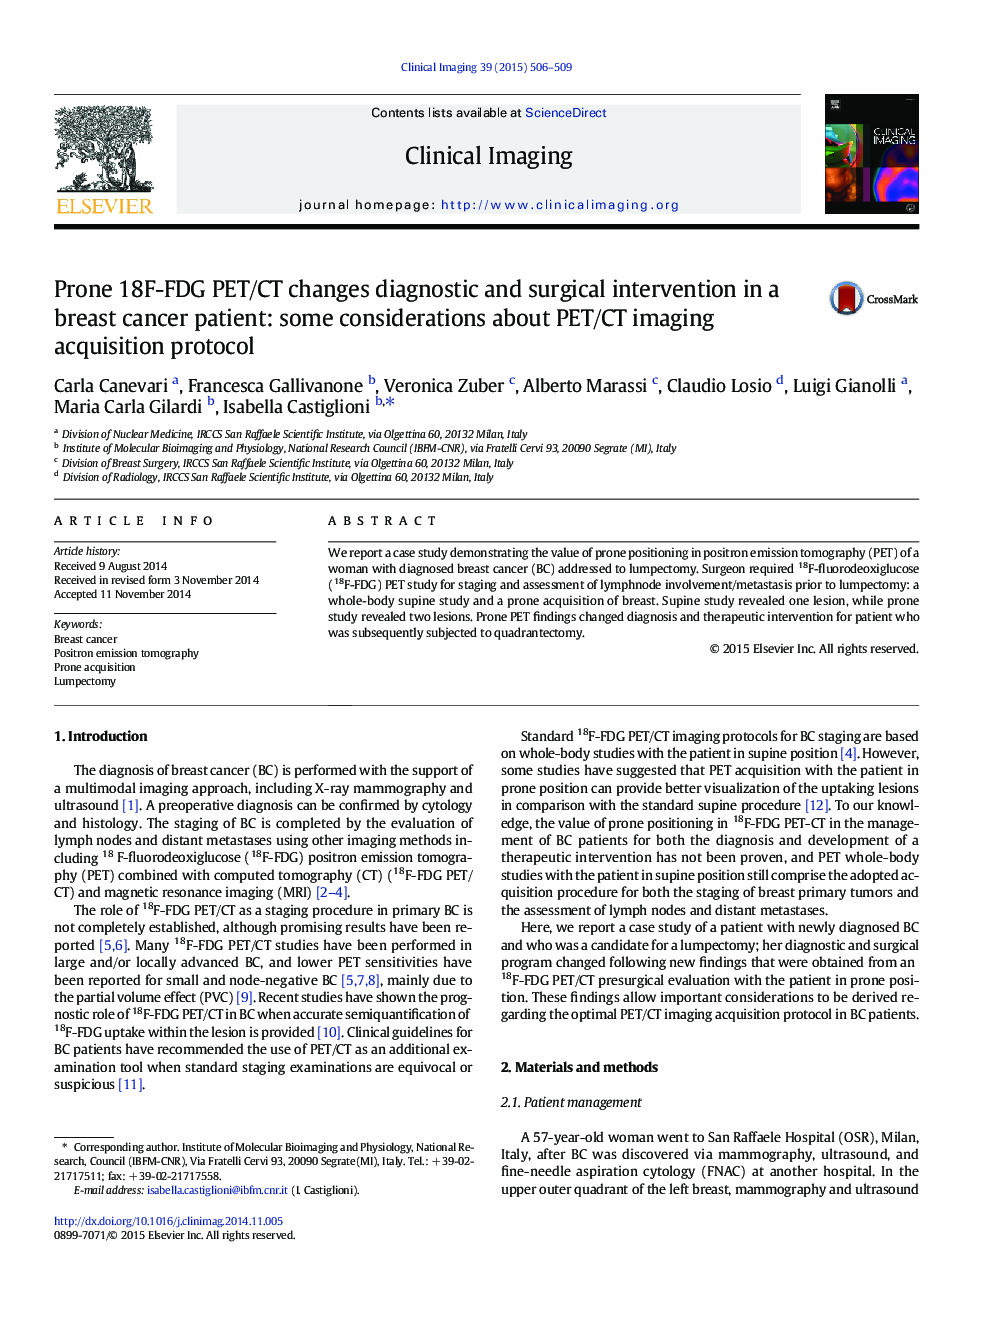 Prone 18F-FDG PET/CT changes diagnostic and surgical intervention in a breast cancer patient: some considerations about PET/CT imaging acquisition protocol